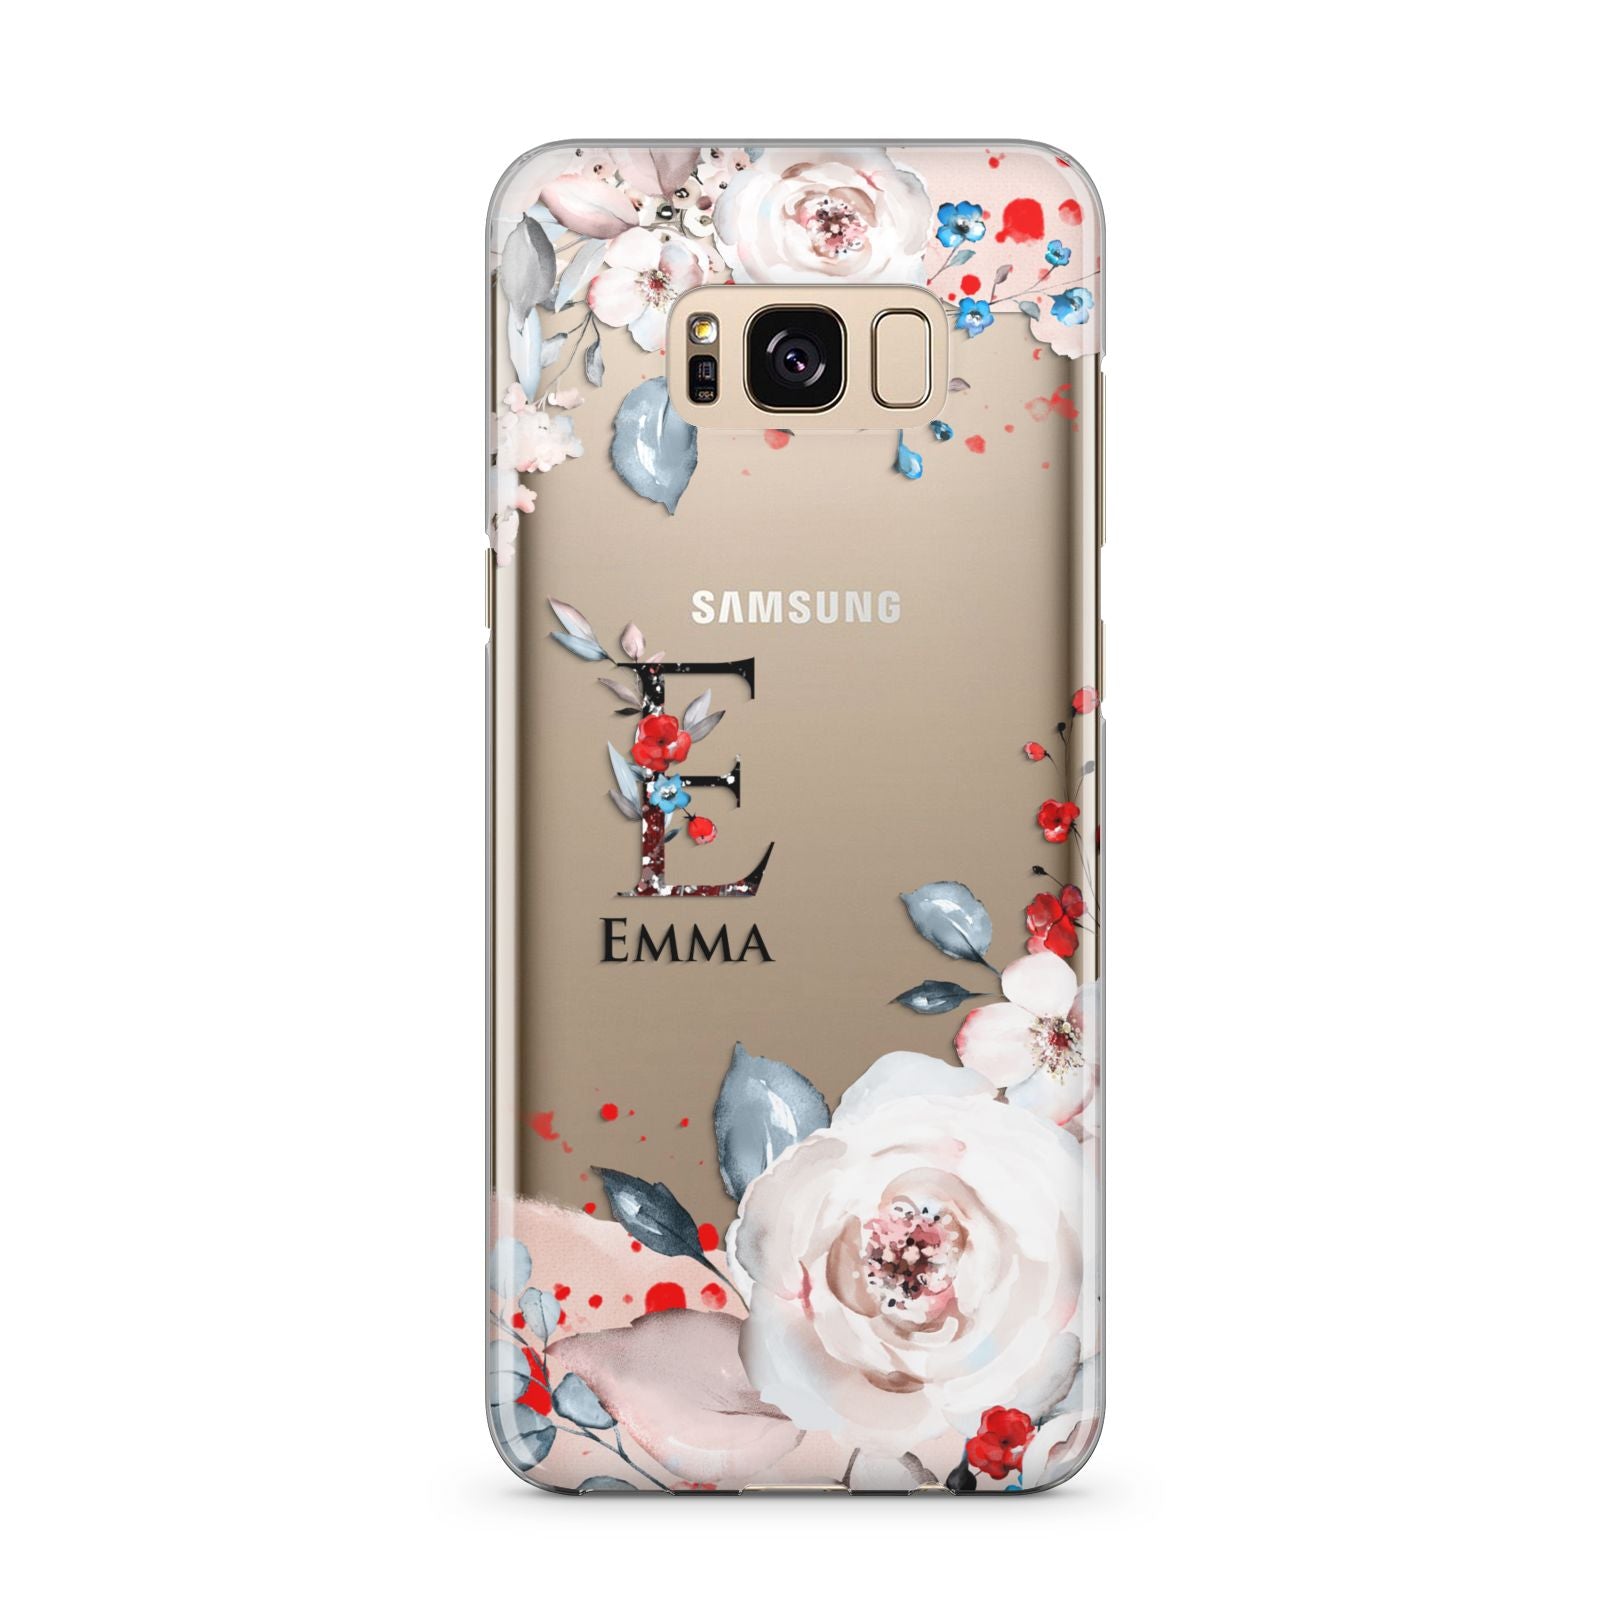 Monogrammed Roses Floral Wreath Samsung Galaxy S8 Plus Case